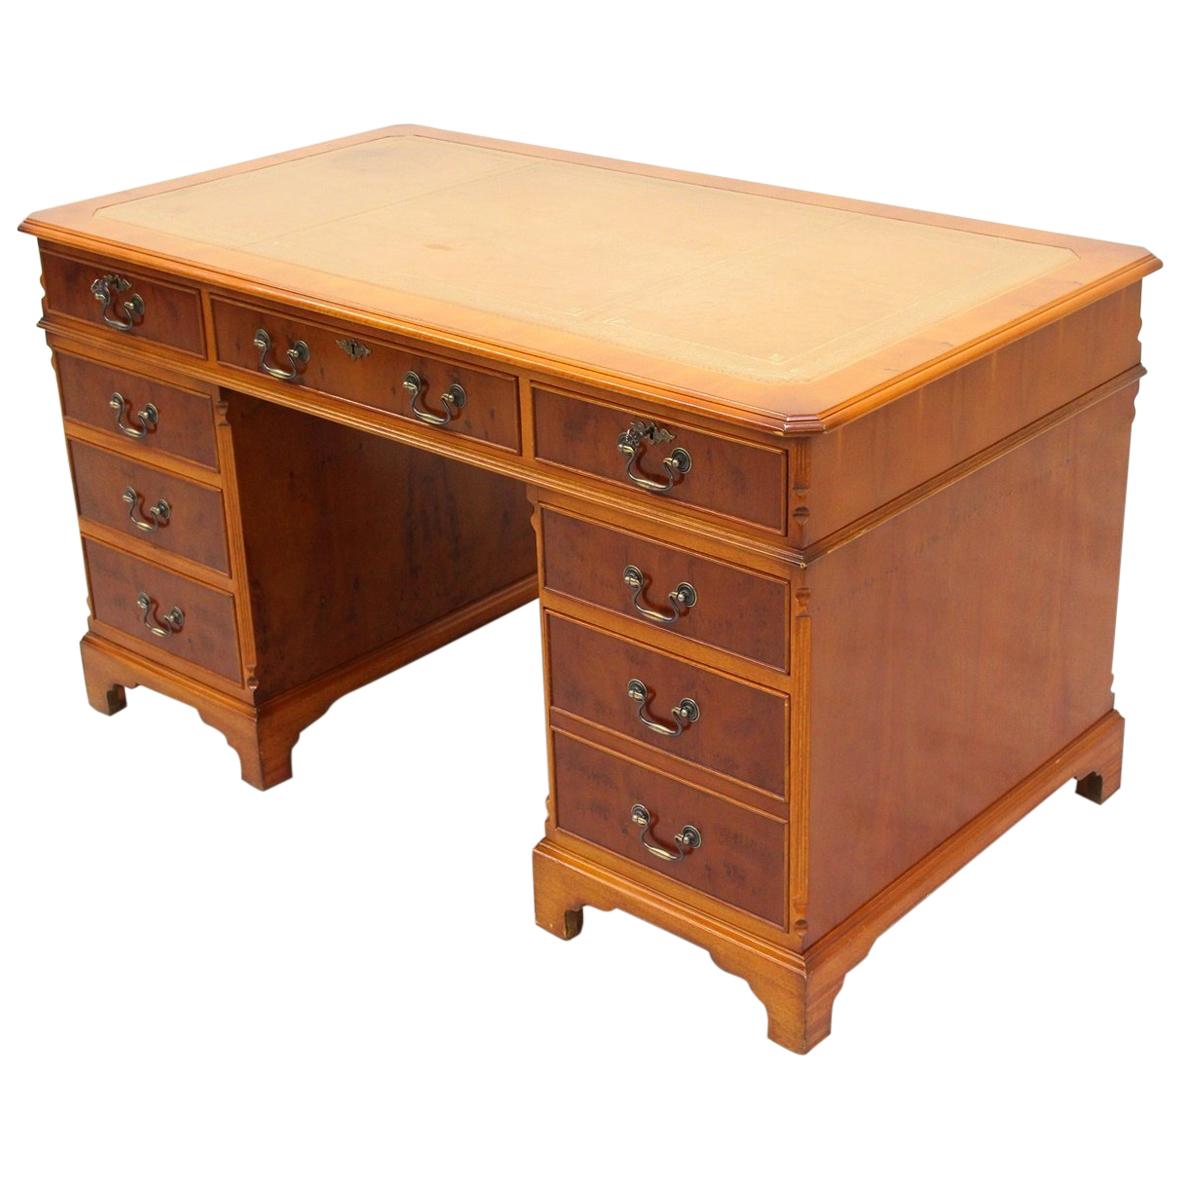 Desk Chesterfield Leather Antique Table English Colonial Style For Sale